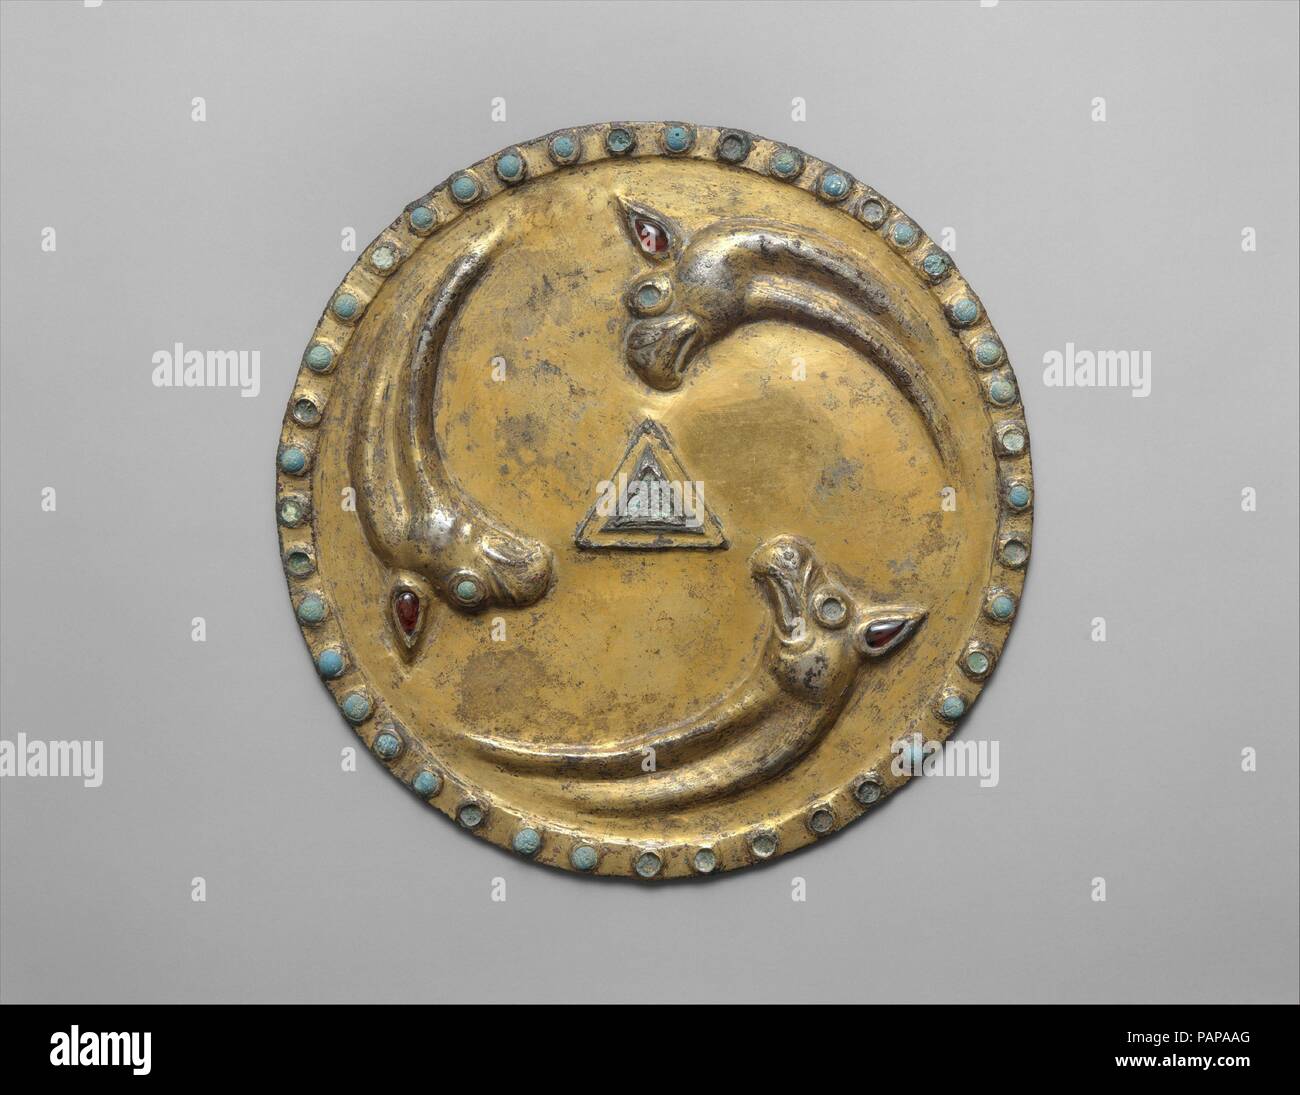 Roundel with griffin heads. Culture: Sarmatian. Dimensions: Diam. 5 7/8 in. (14.9 cm). Date: ca. 1st-2nd century. Museum: Metropolitan Museum of Art, New York, USA. Stock Photo